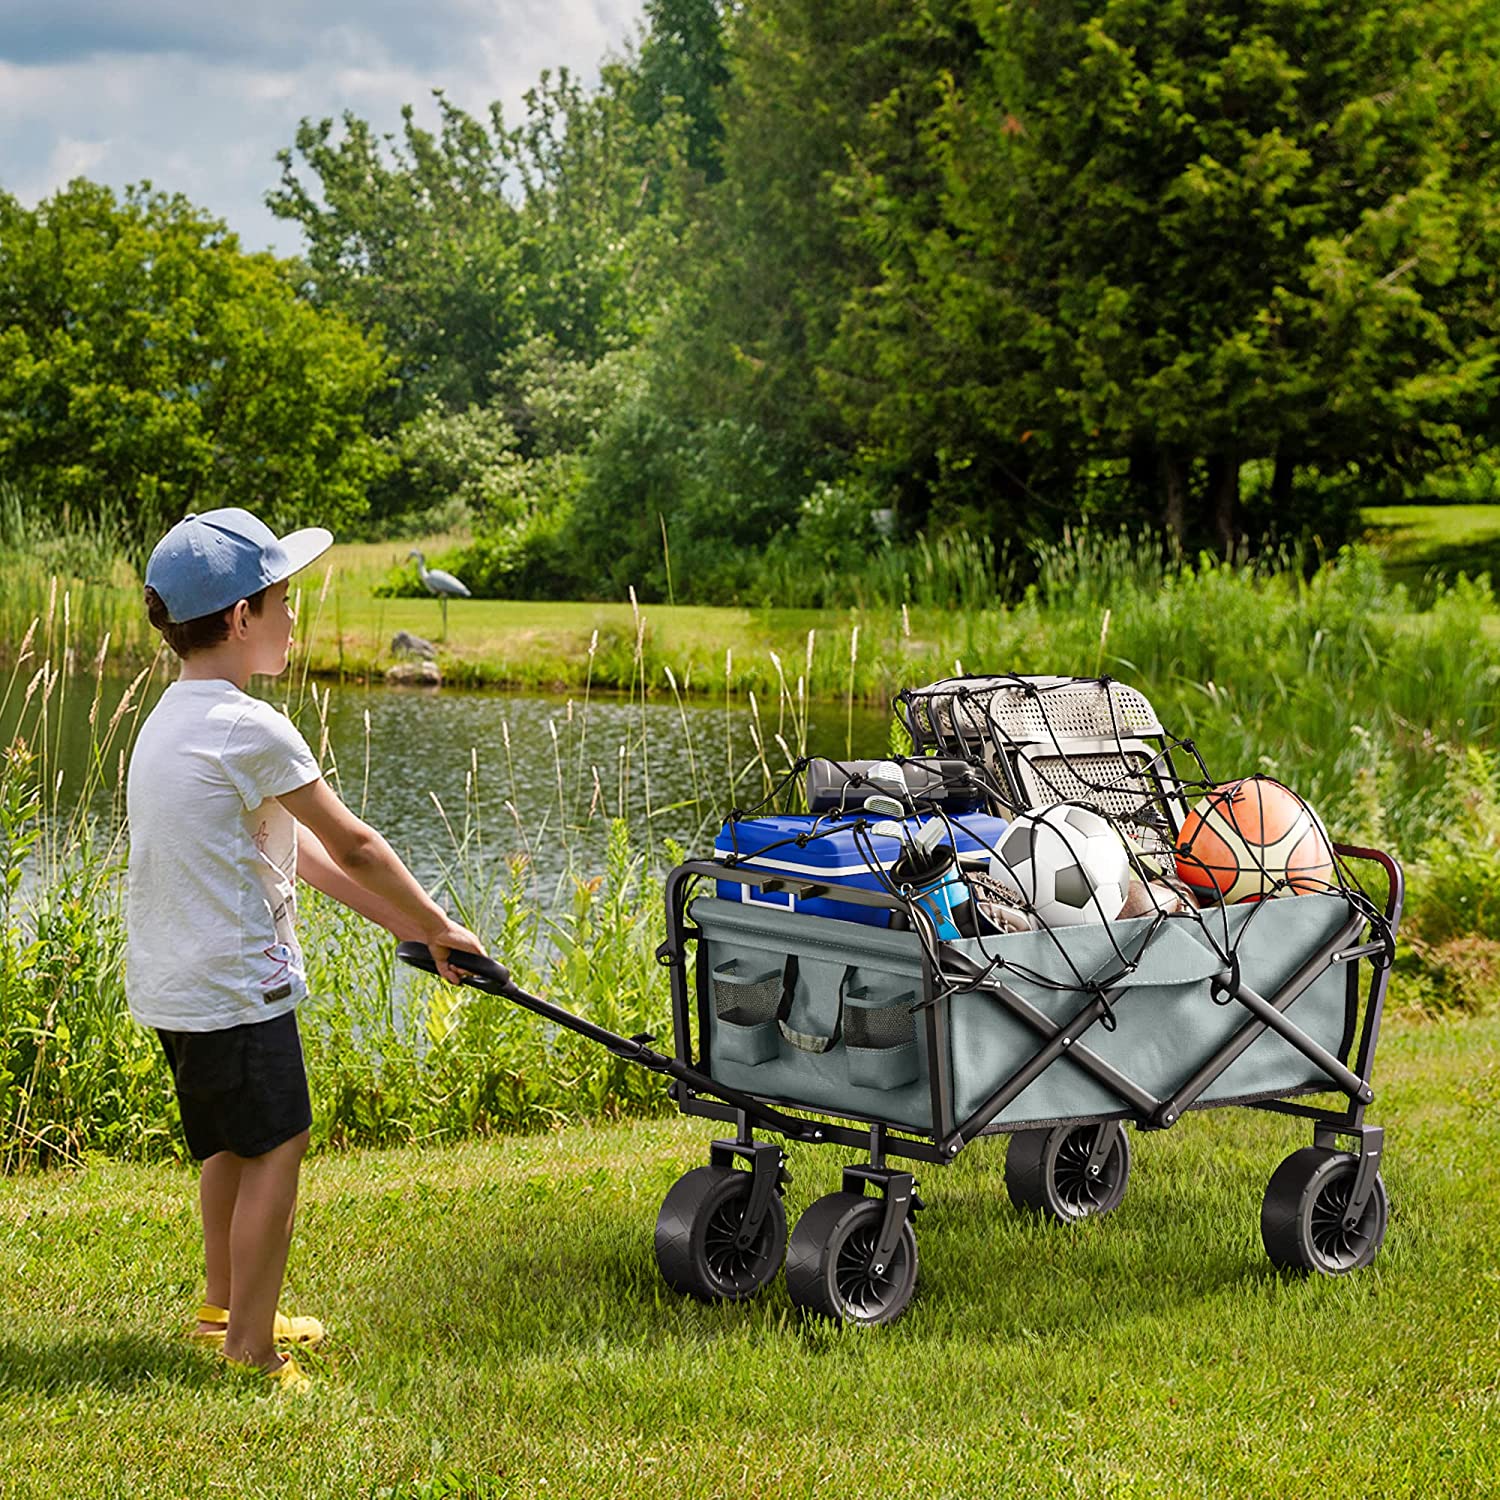 YITAHOME Utility Folding Wagon Camping Park Wagon Cart Portable Collapsible  Garden Cart with Roll Table Plate, Drink Holders, Side Storage Pocket,  for Sports, Outdoor, Garden, Fishing, Gray